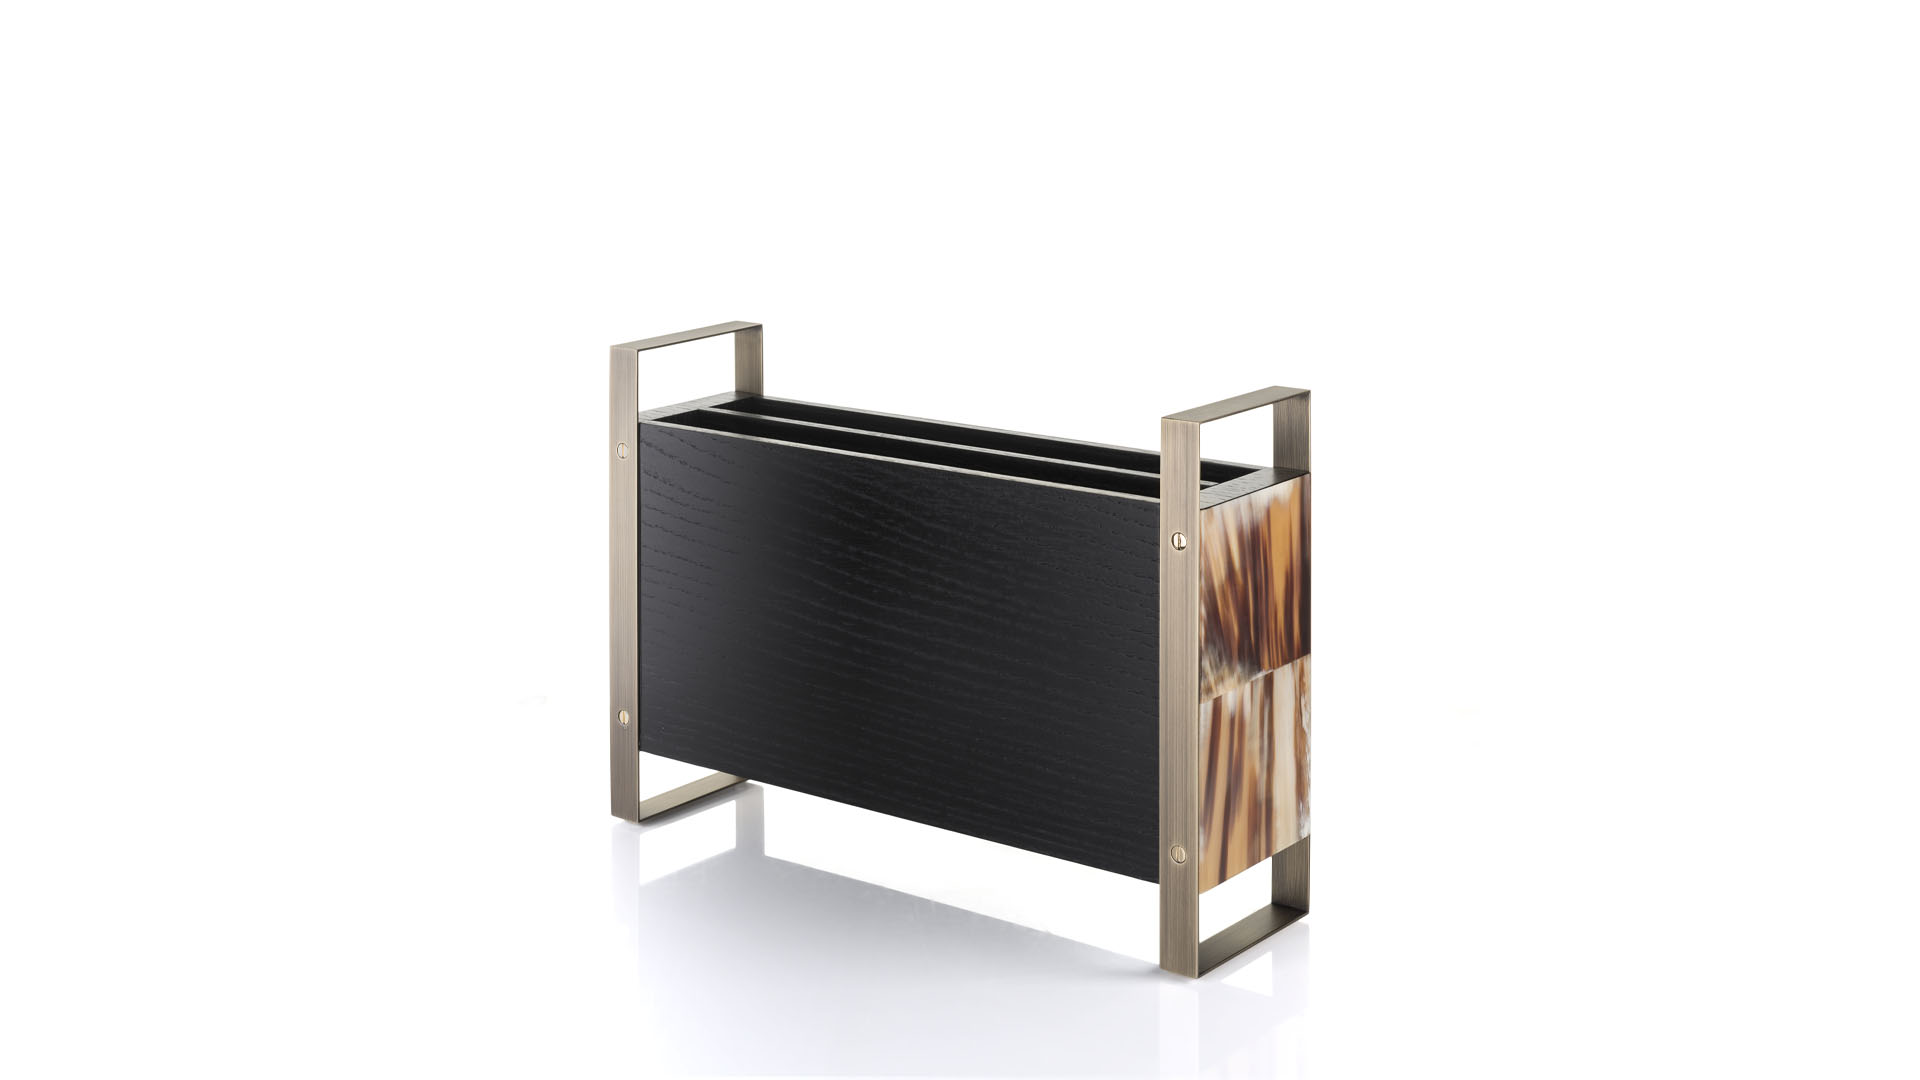 Coat stands and complementary furniture - Dante magazine rack in black oak veneer and horn - cover - Arcahorn